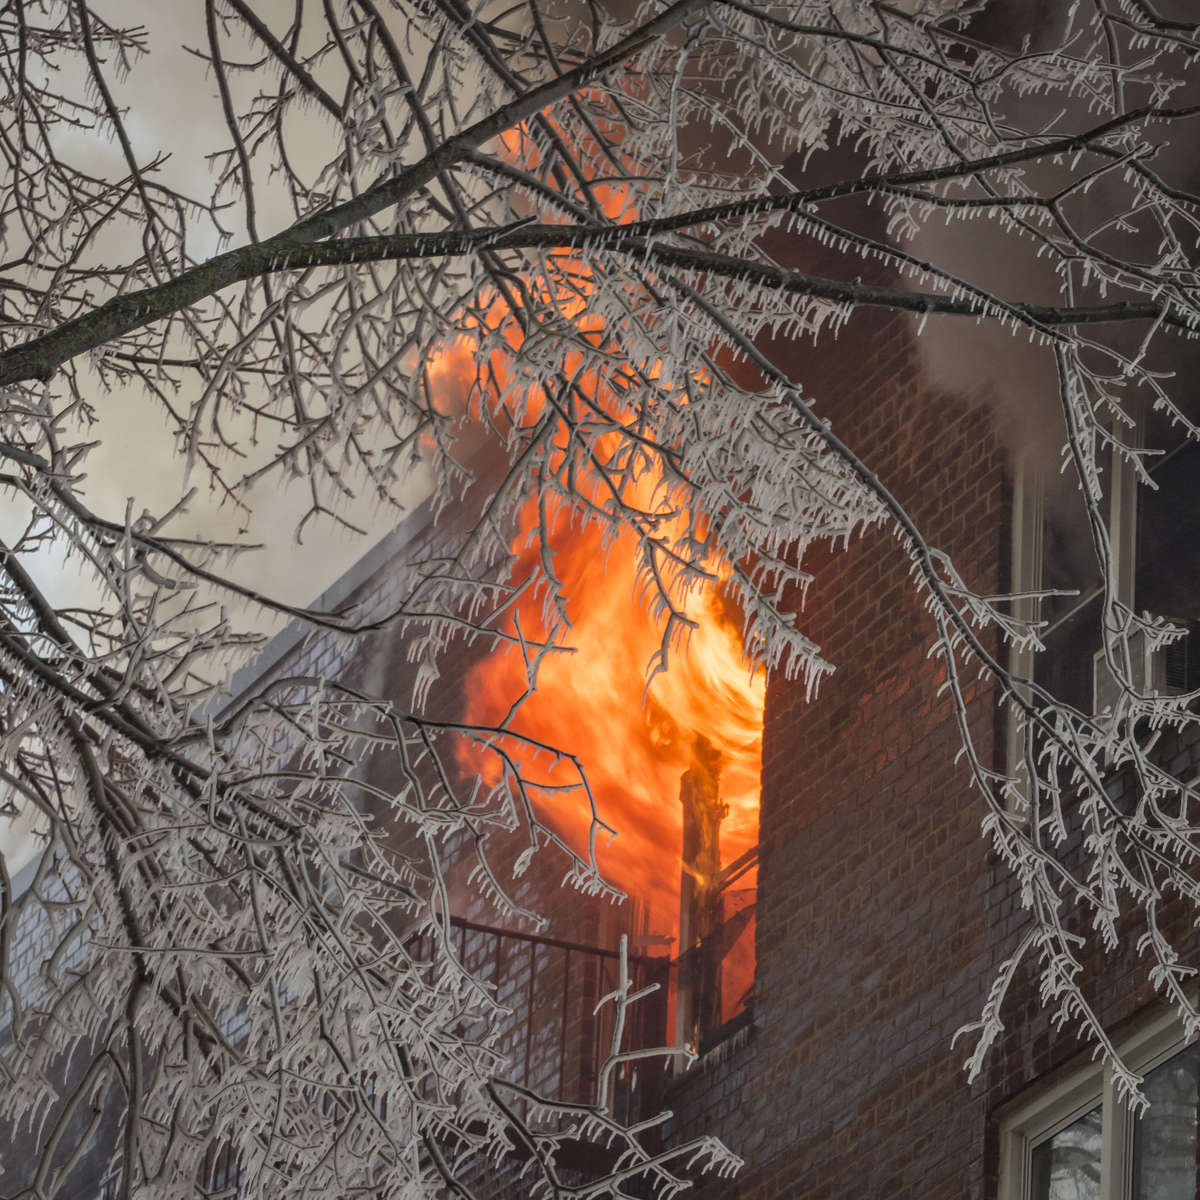 Firefighters battle a fatal 4-alarm fire that started on the 5th floor and quickly spread to the upper floors in the building located at 1 Hawley Terrace in Yonkers, New York on Wednesday, March 15, 2017.